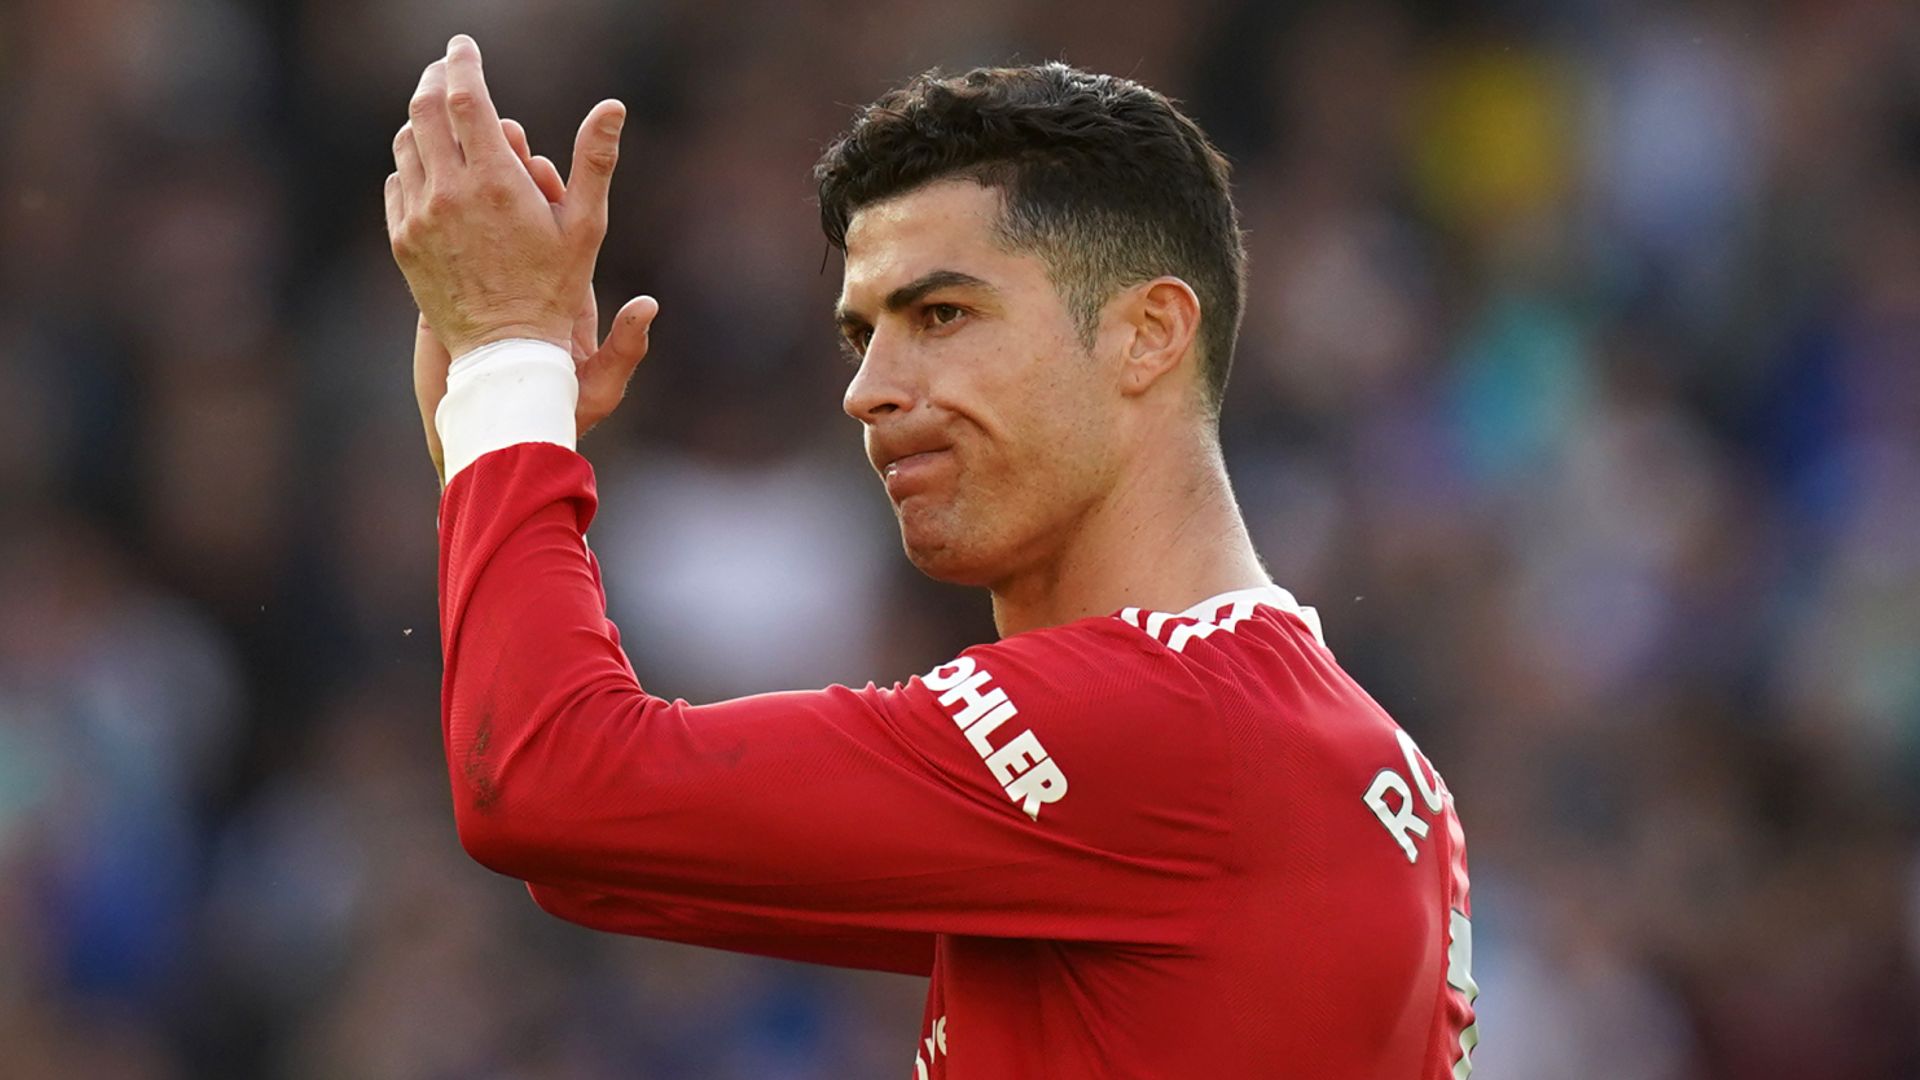 Ronaldo expected to stay at Man Utd despite reported 'frustration'